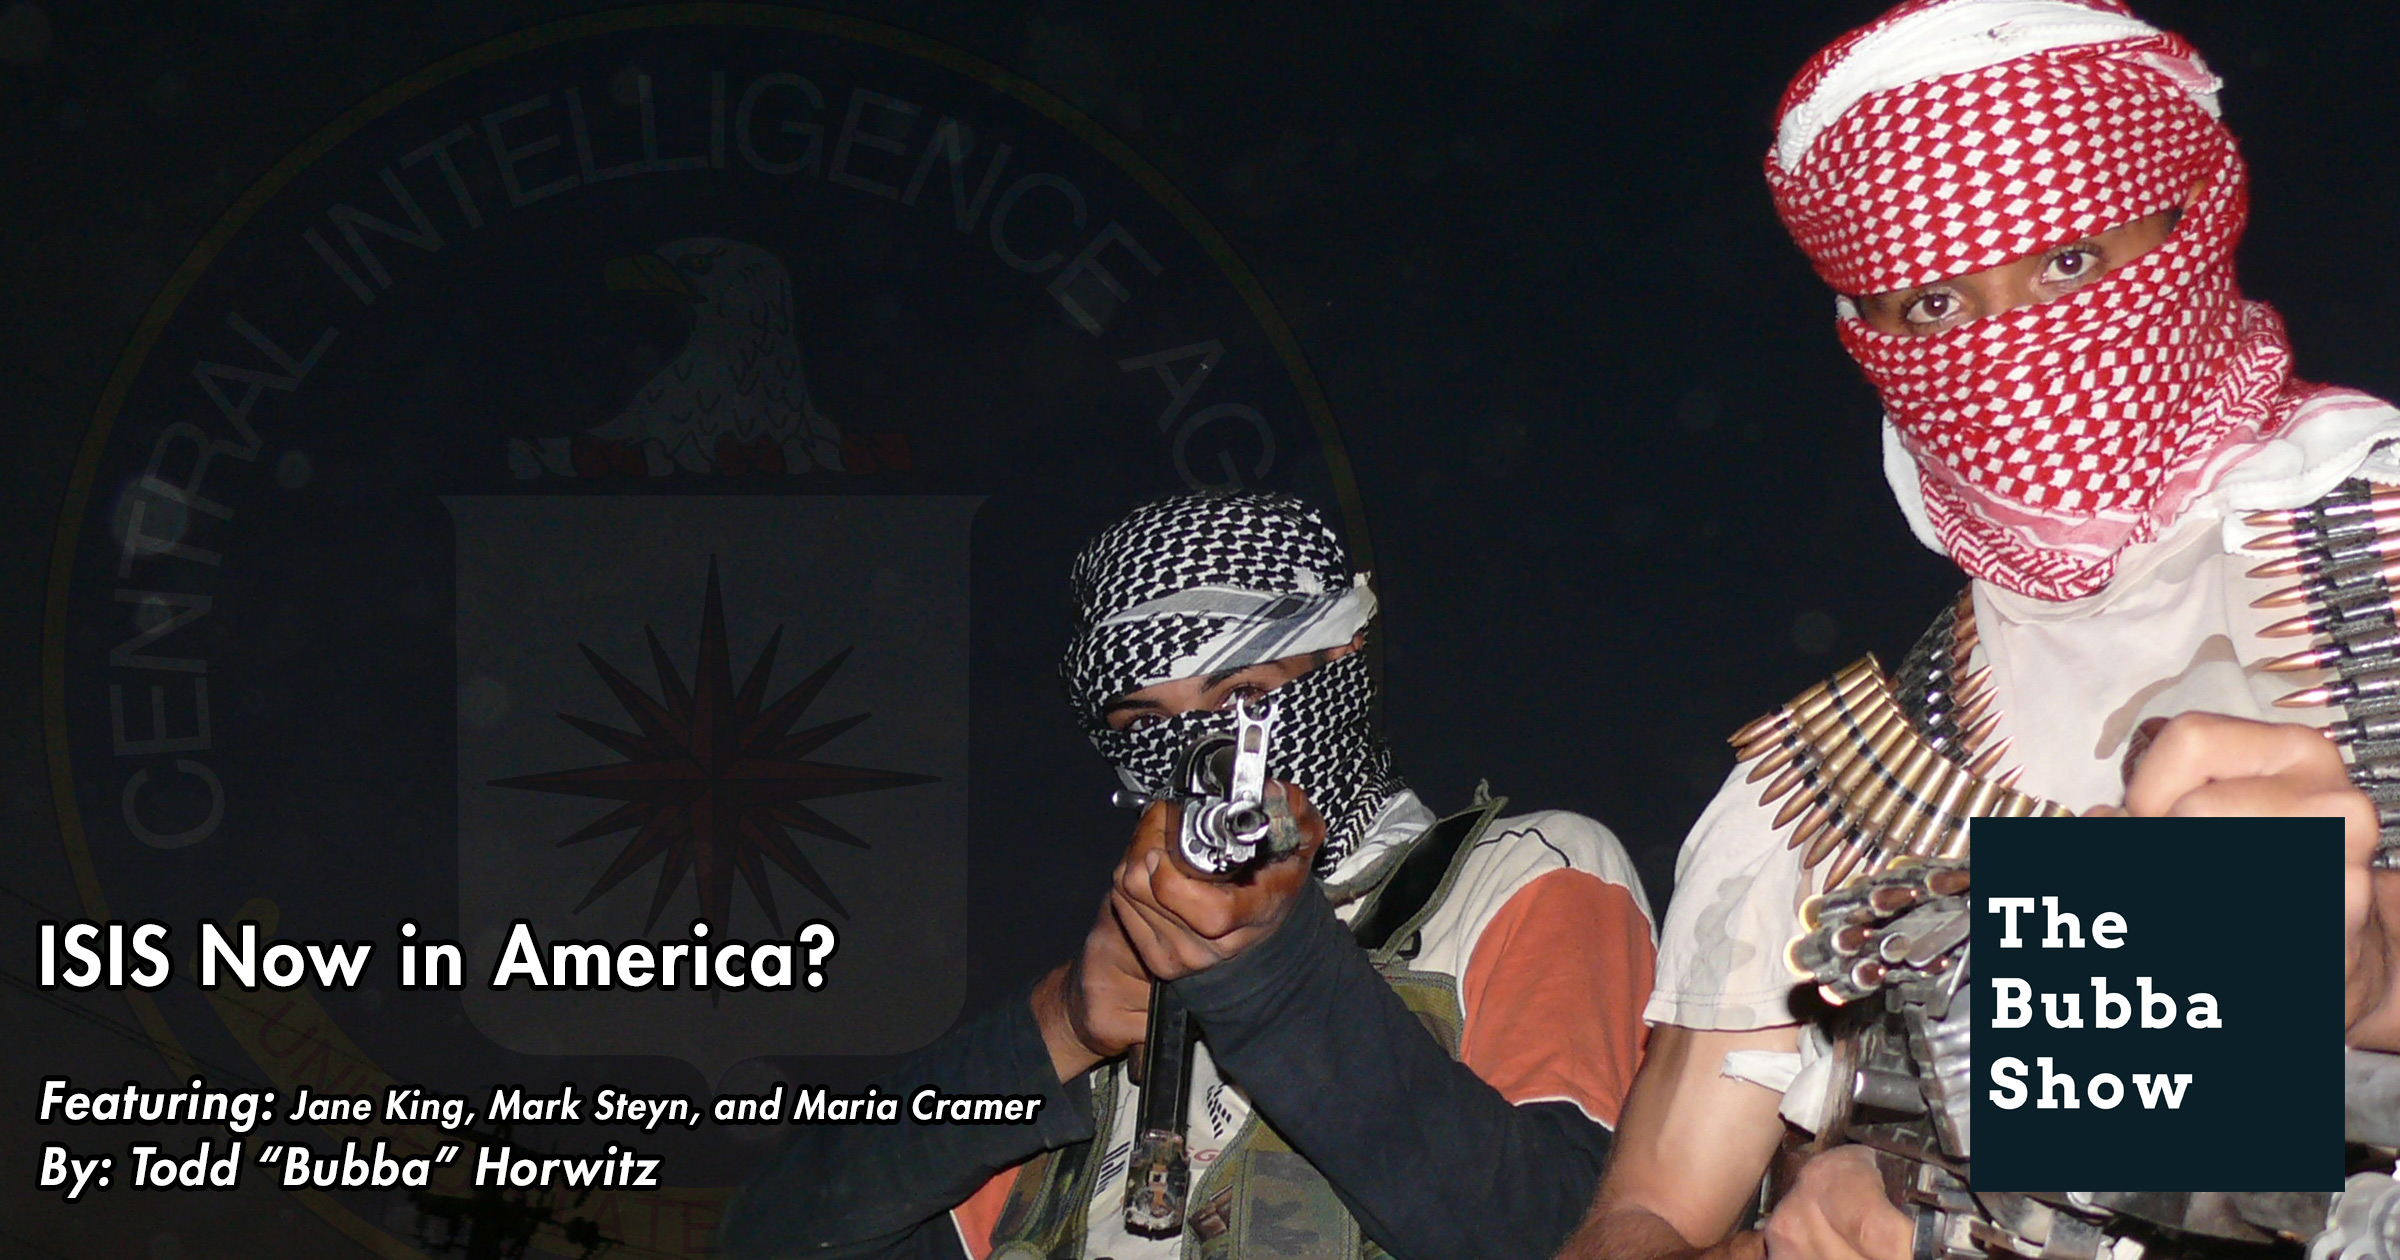 ISIS CIA Assets in America? FEATURED